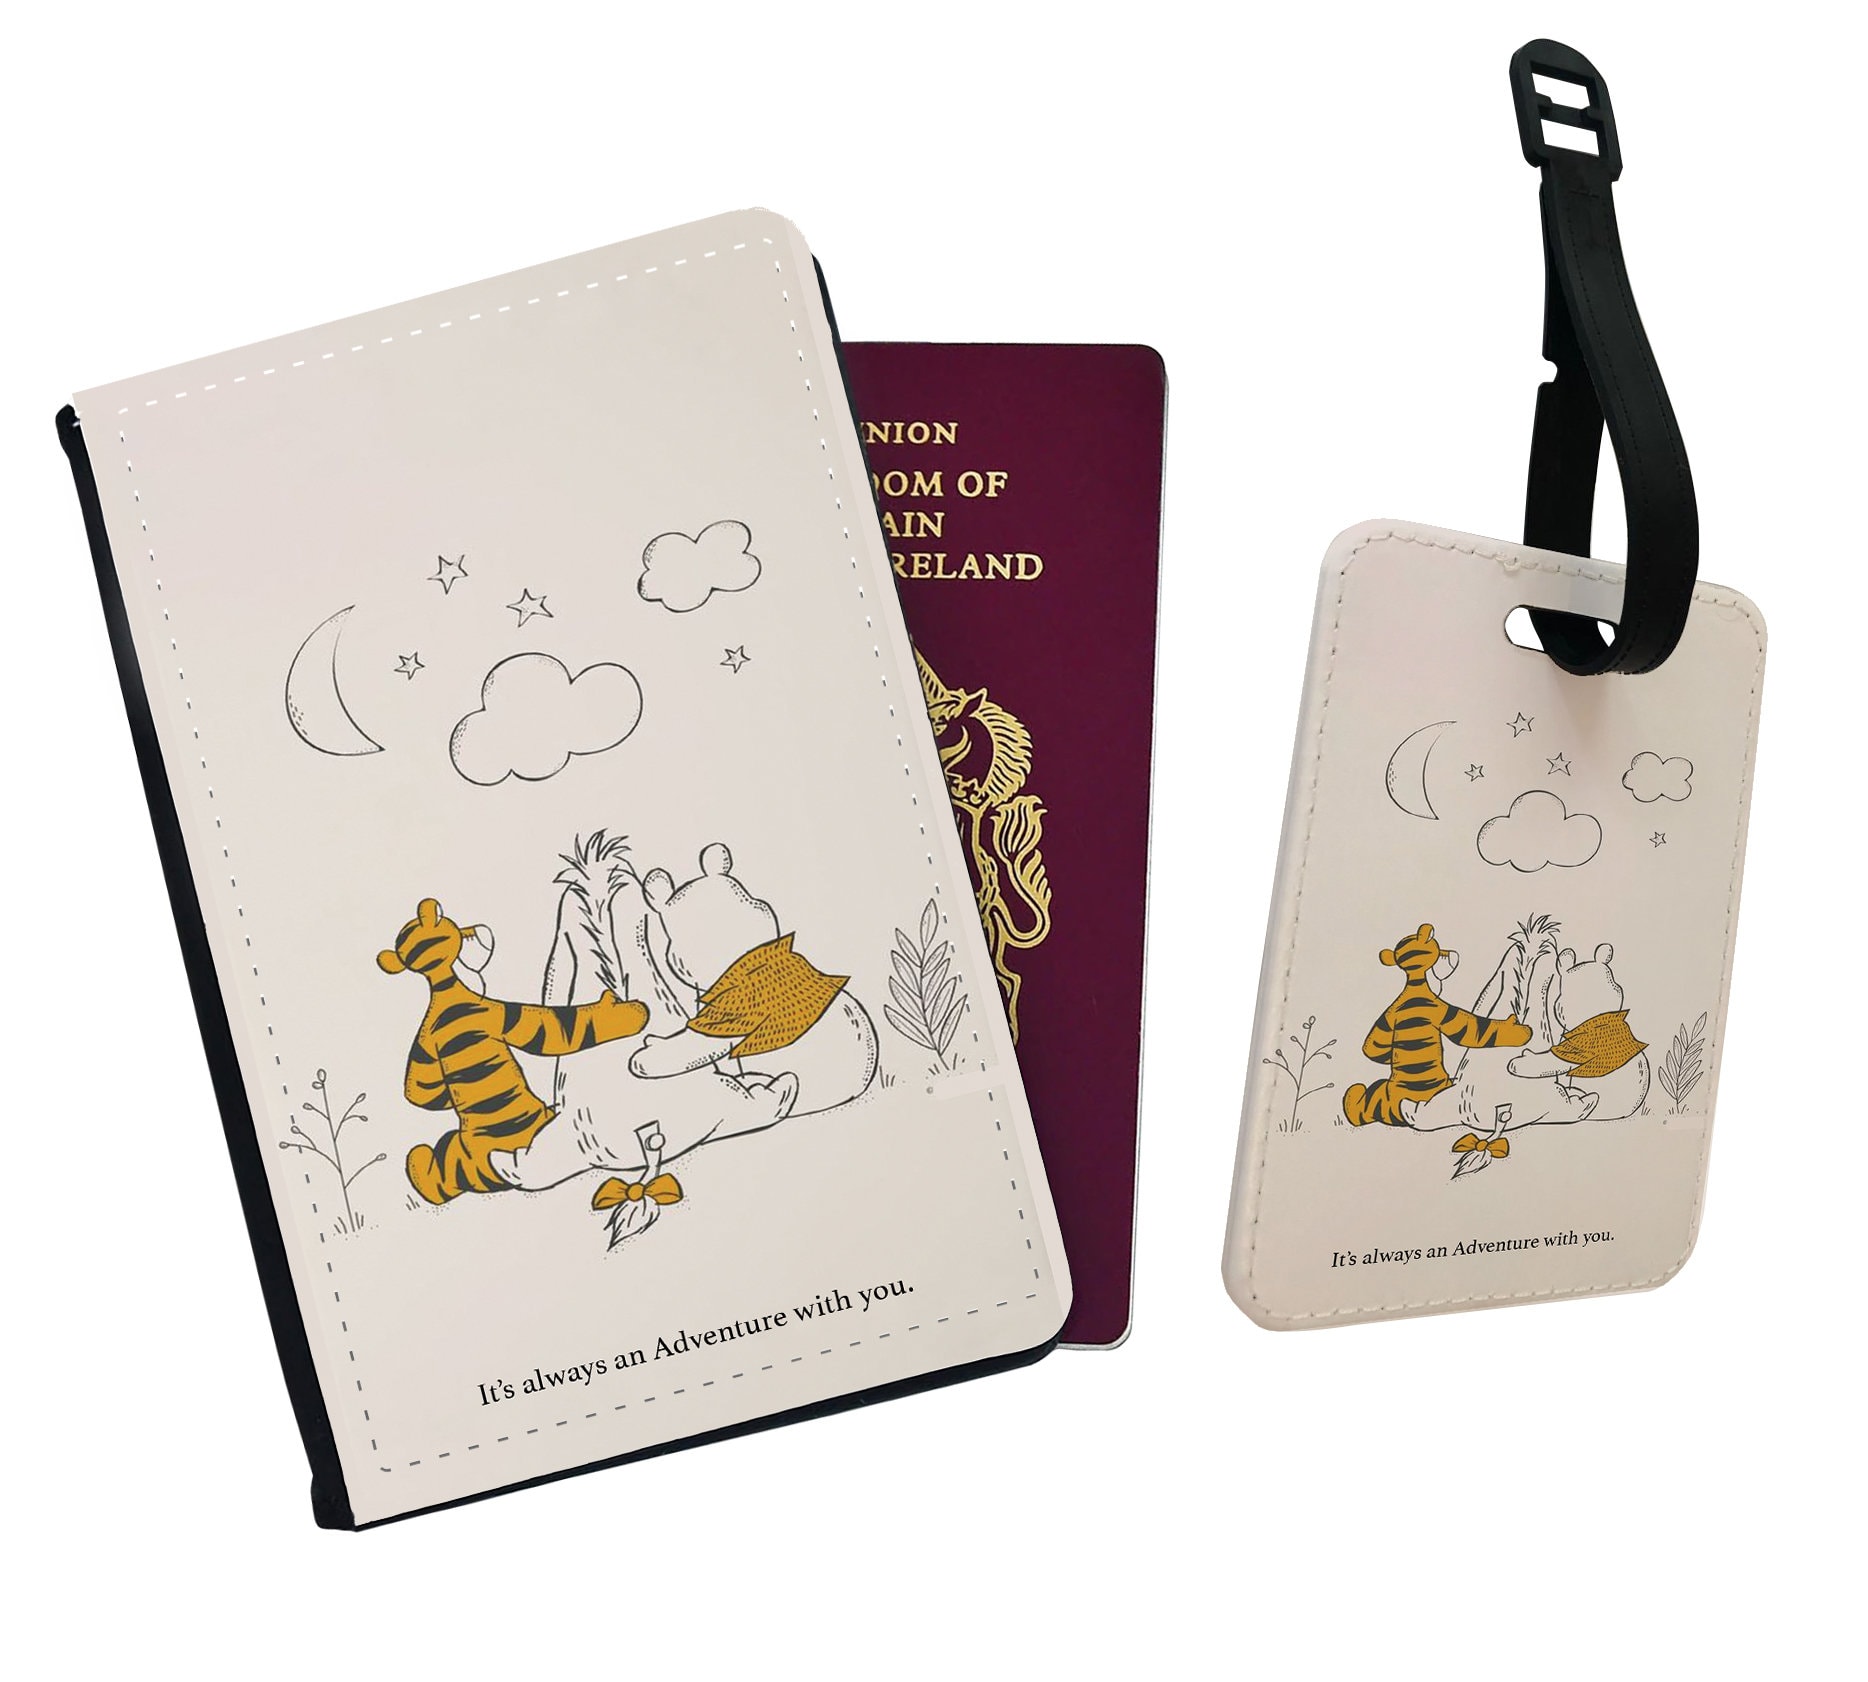 Personalised Passport Cover, Customised Luggage Tag, Travel Set Gift,  Winnie Pooh, Tigger and Eeyore, It's Always an Adventure With You 